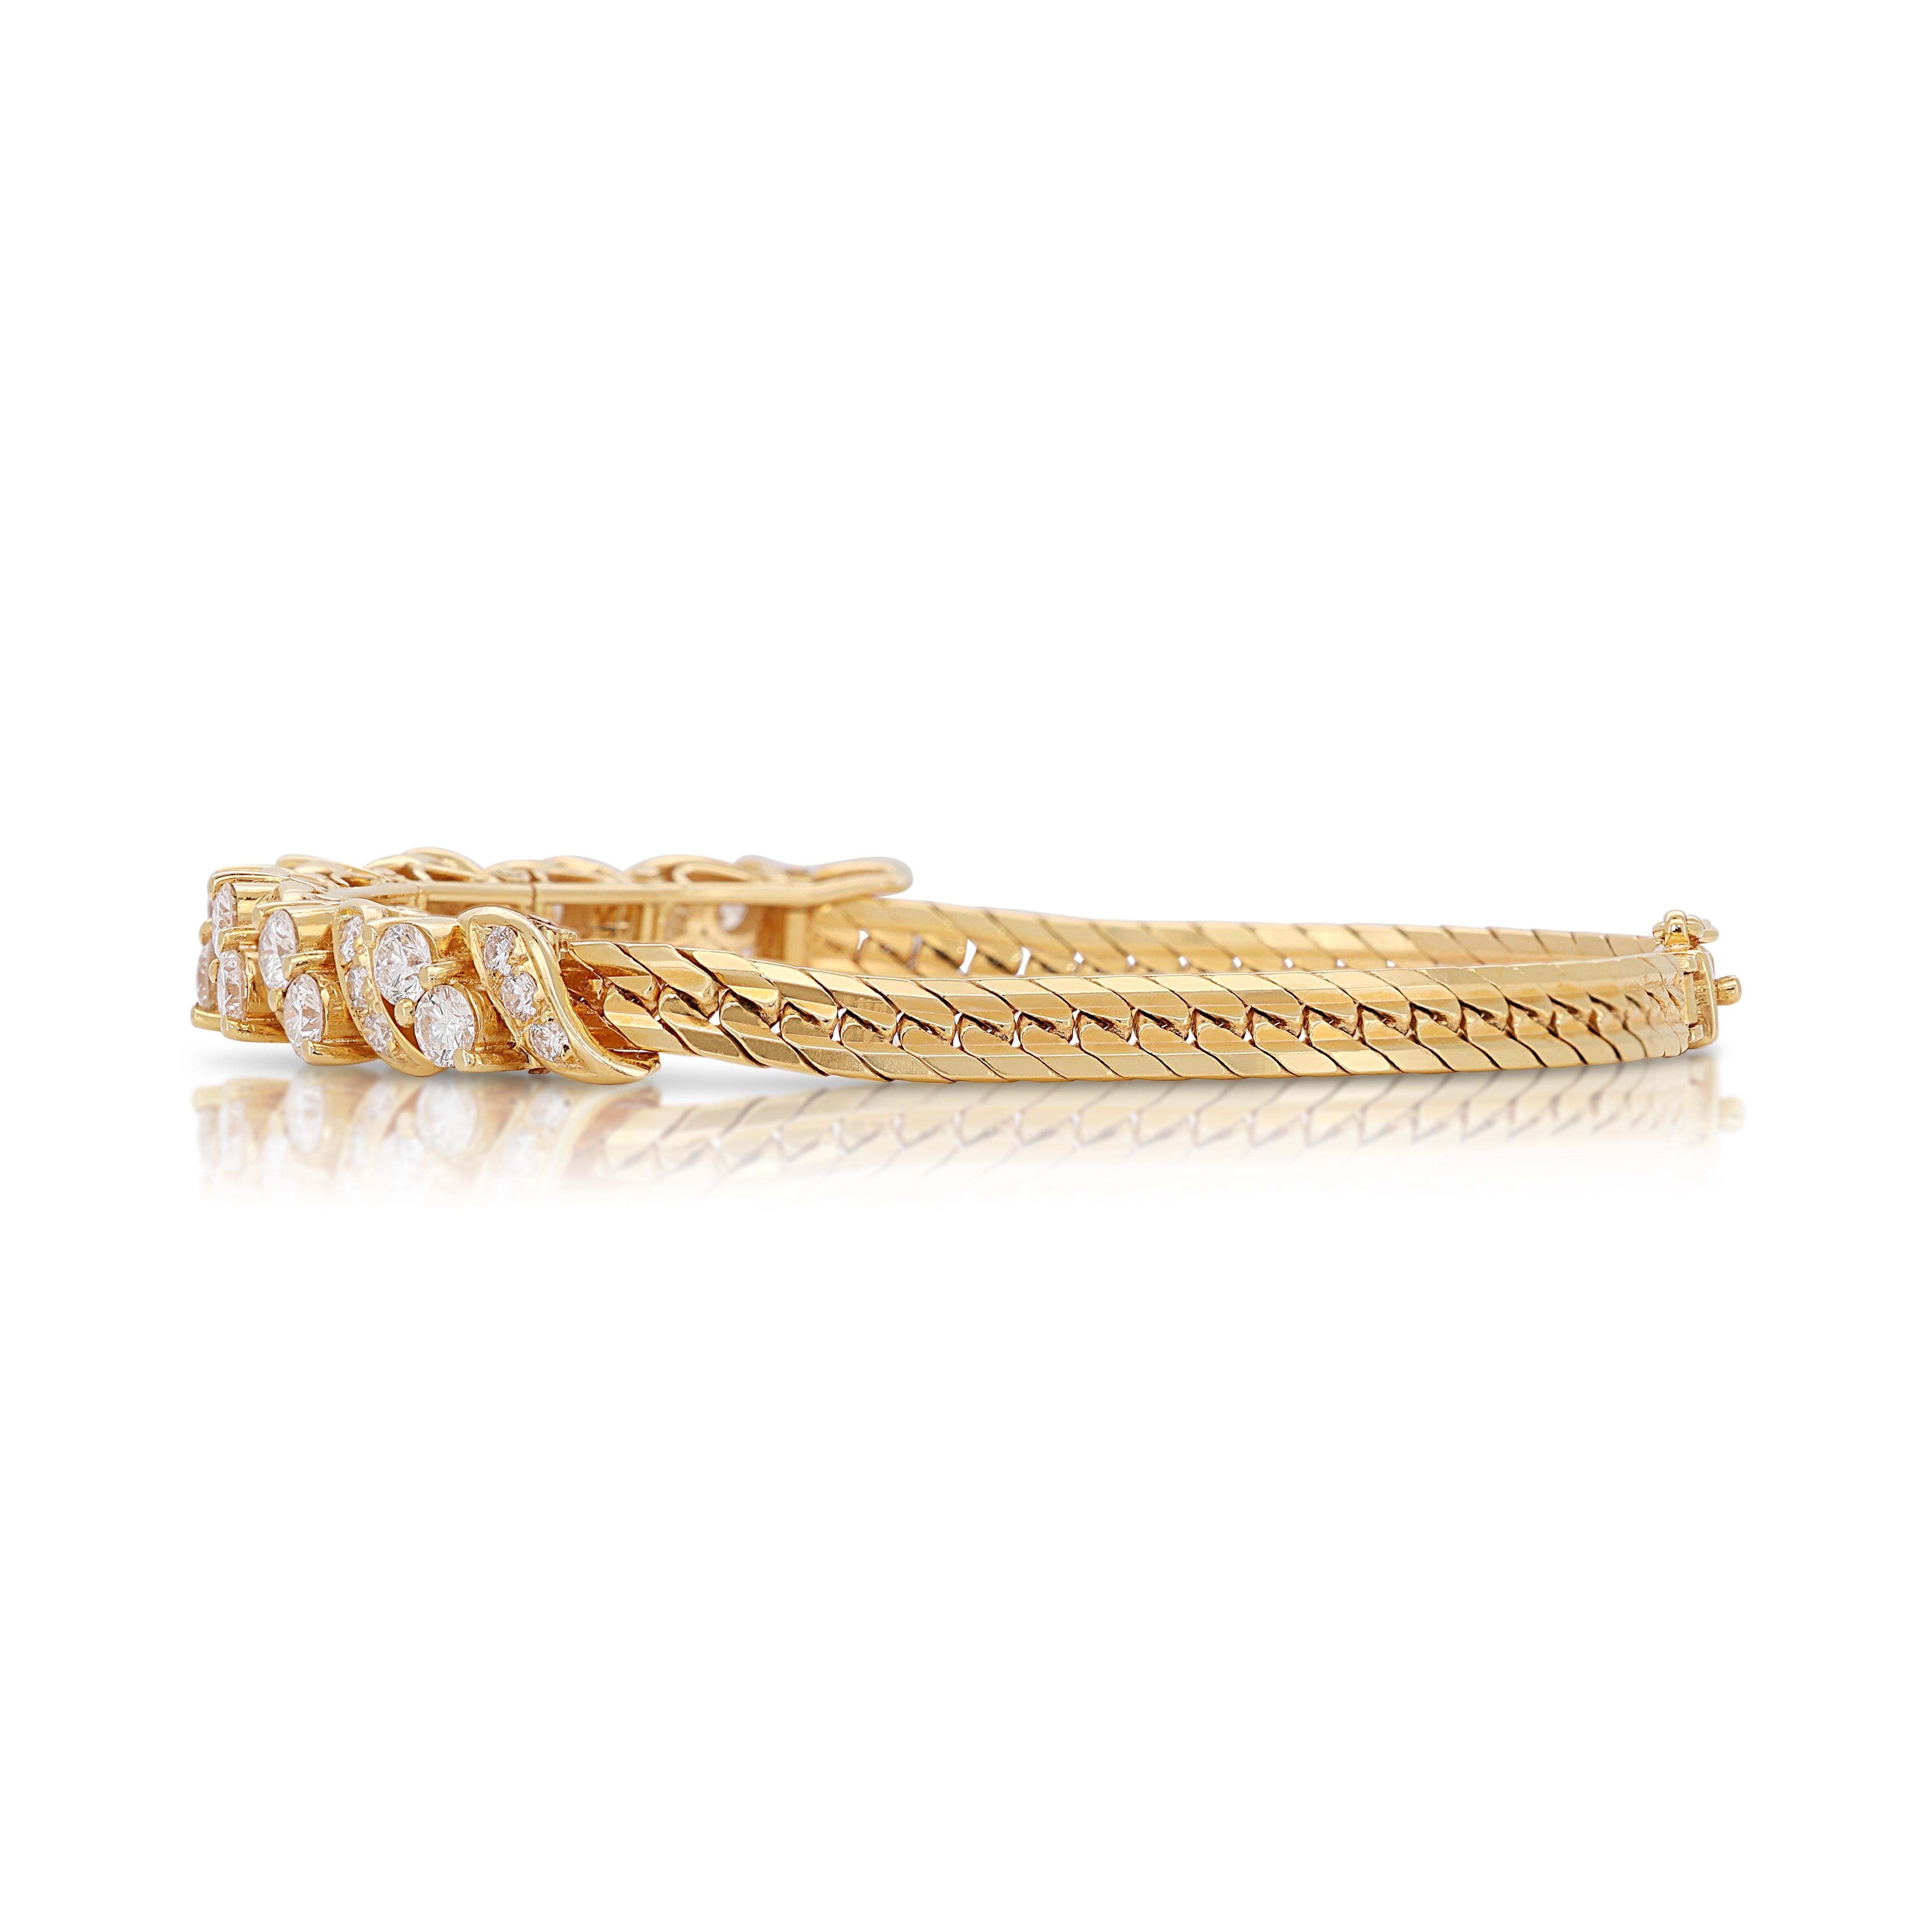 Sophisticated 1.87ct Diamonds Bracelet in 20k Yellow Gold In Excellent Condition For Sale In רמת גן, IL